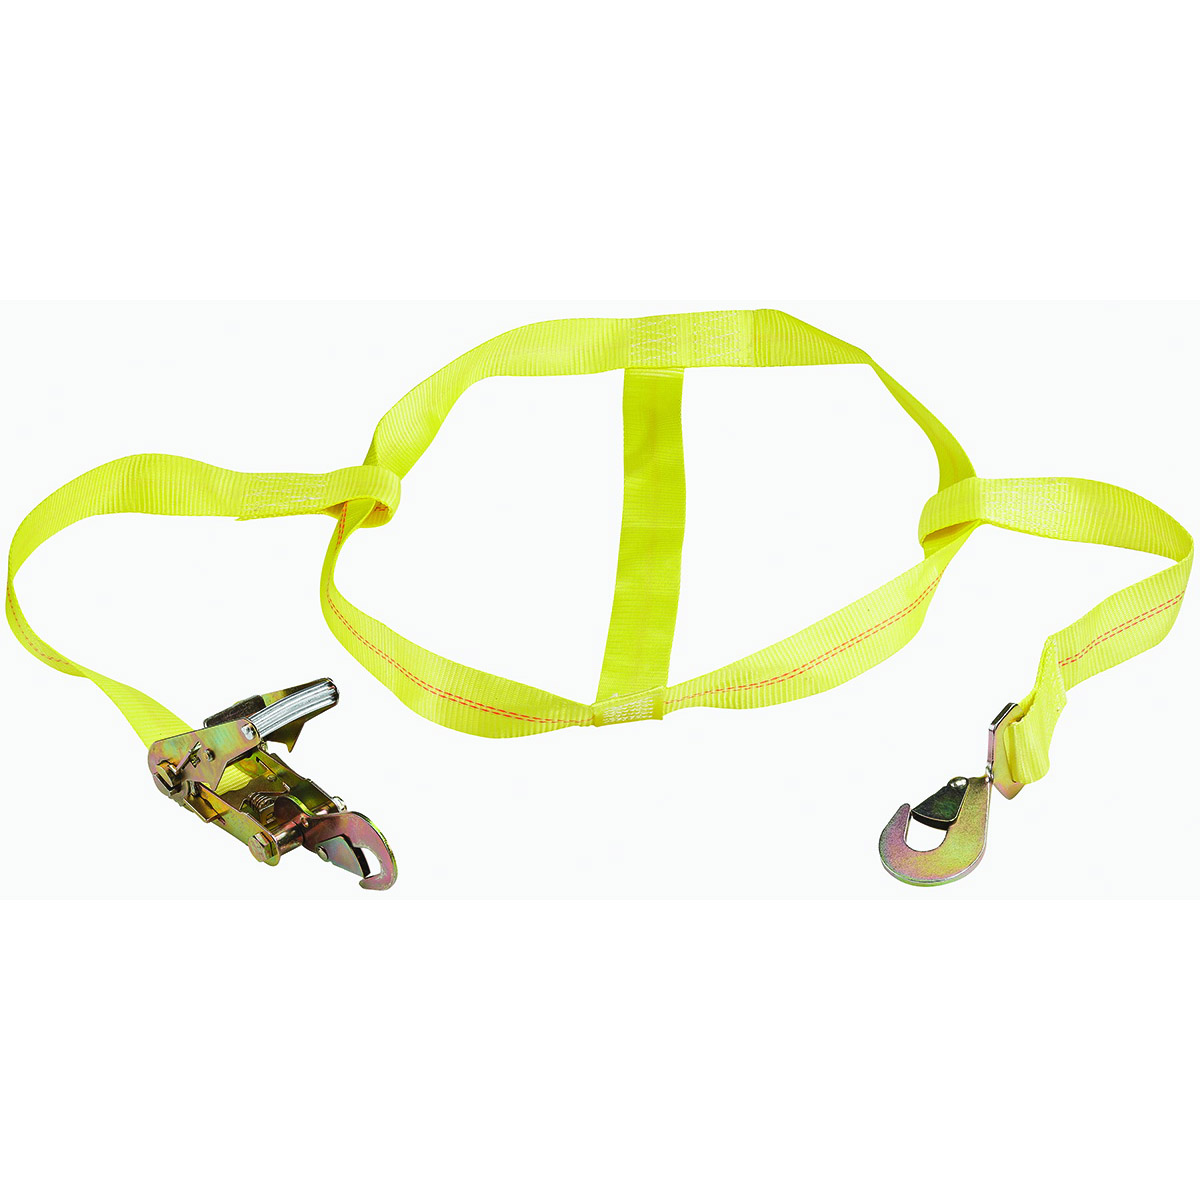 FH4016 Tie-Down, 2 in W, 14-7/8 in L, Polyester Webbing, Metal Ratchet, Yellow, 3333 lb